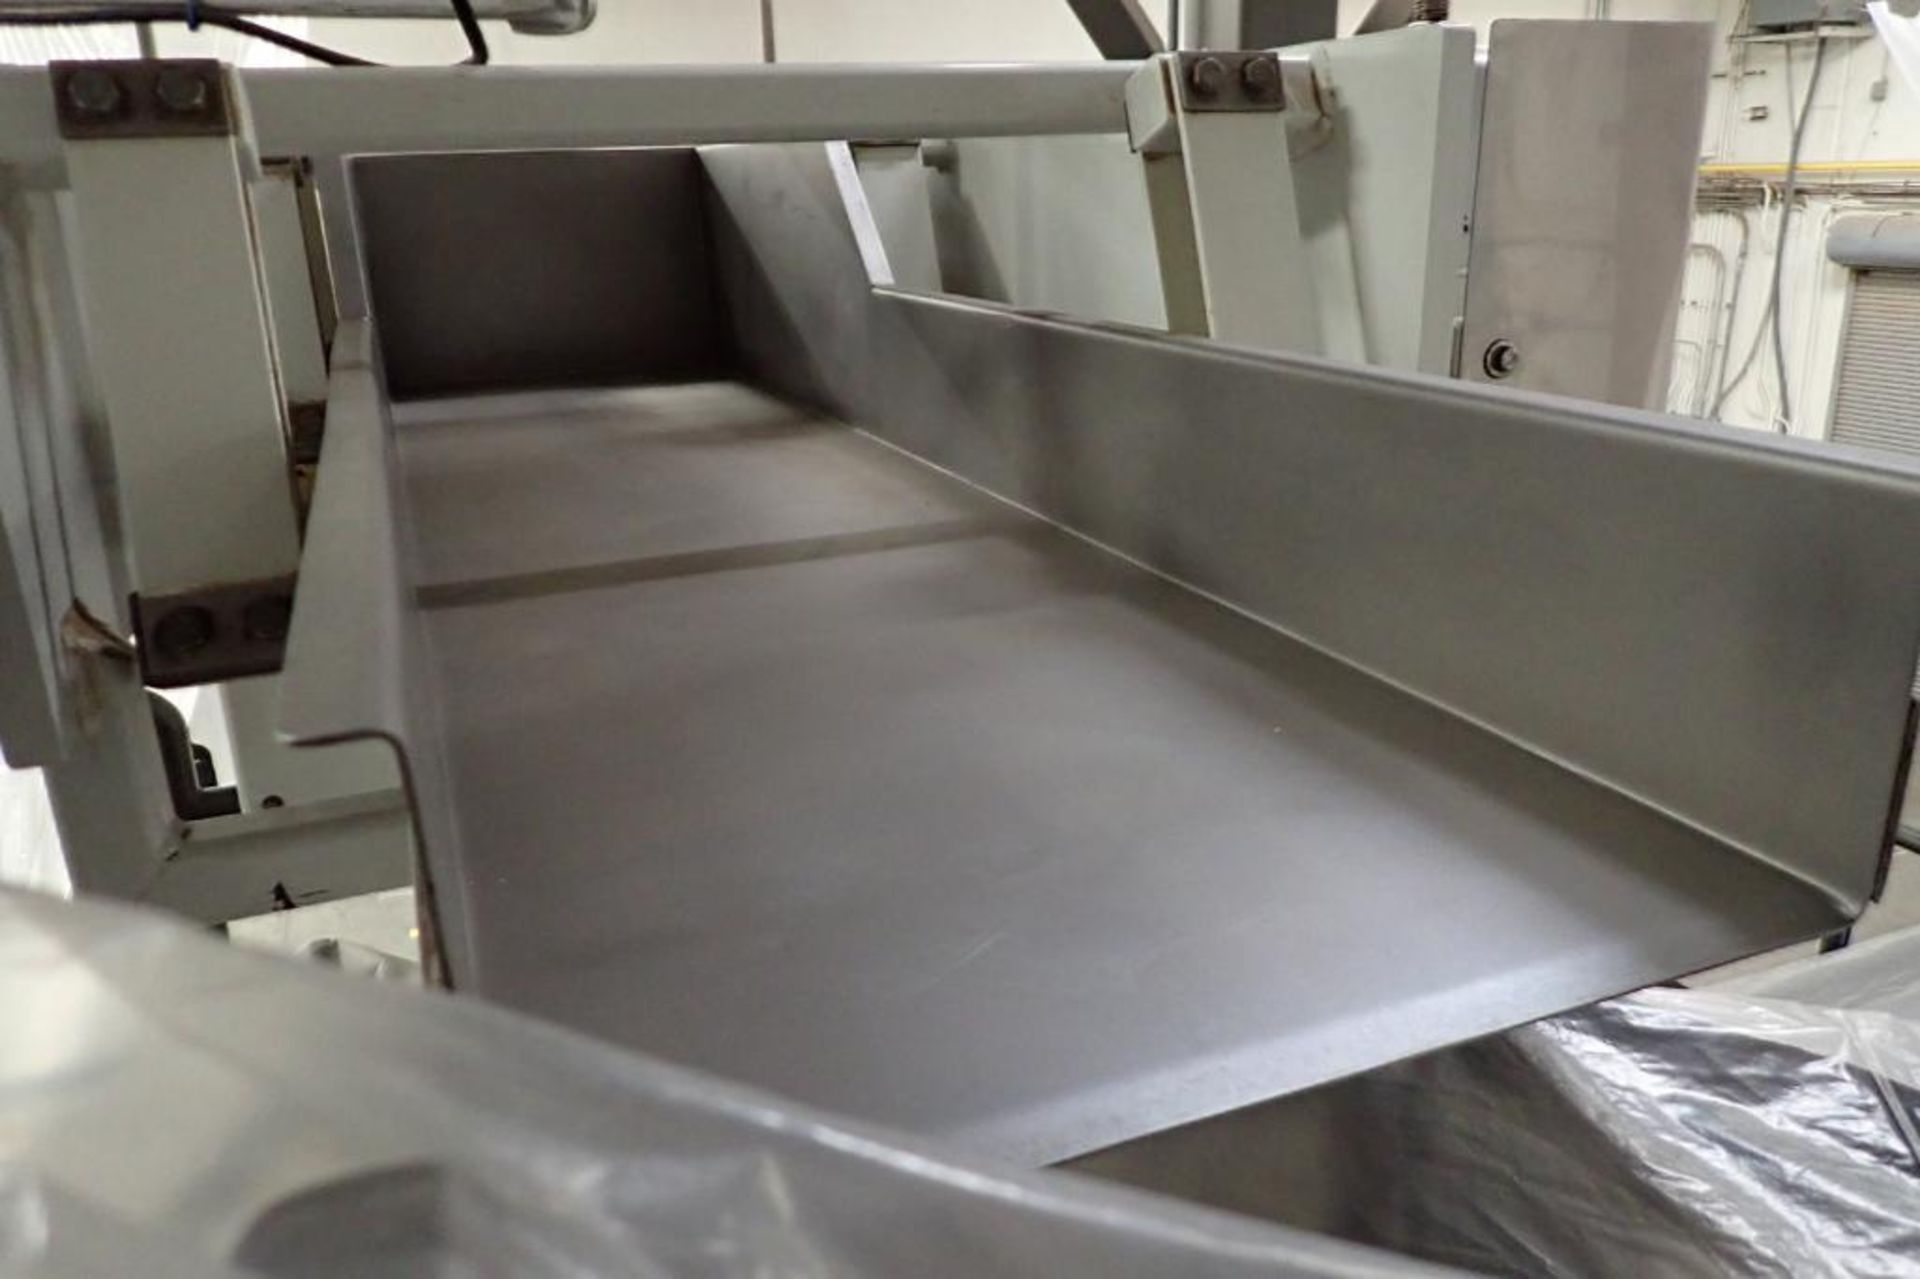 2012 Deamco vibratory conveyor, Model VCNF-U-18x6x6-0, 15220VCNF-U-03A Item 5, 72 in. long x 18 in. - Image 3 of 7